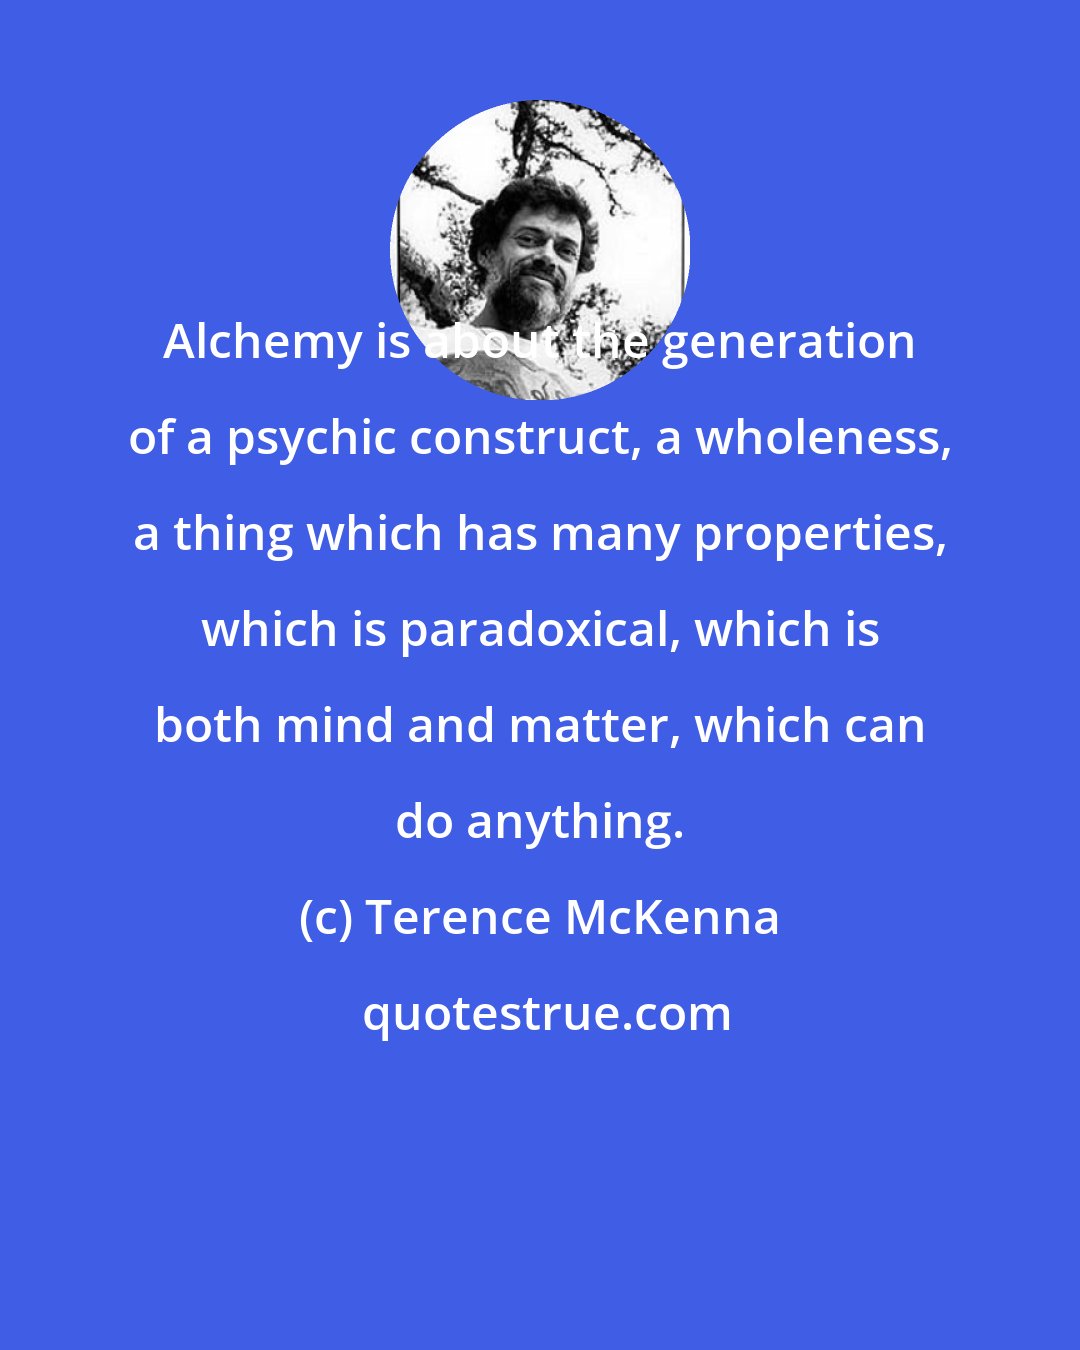 Terence McKenna: Alchemy is about the generation of a psychic construct, a wholeness, a thing which has many properties, which is paradoxical, which is both mind and matter, which can do anything.